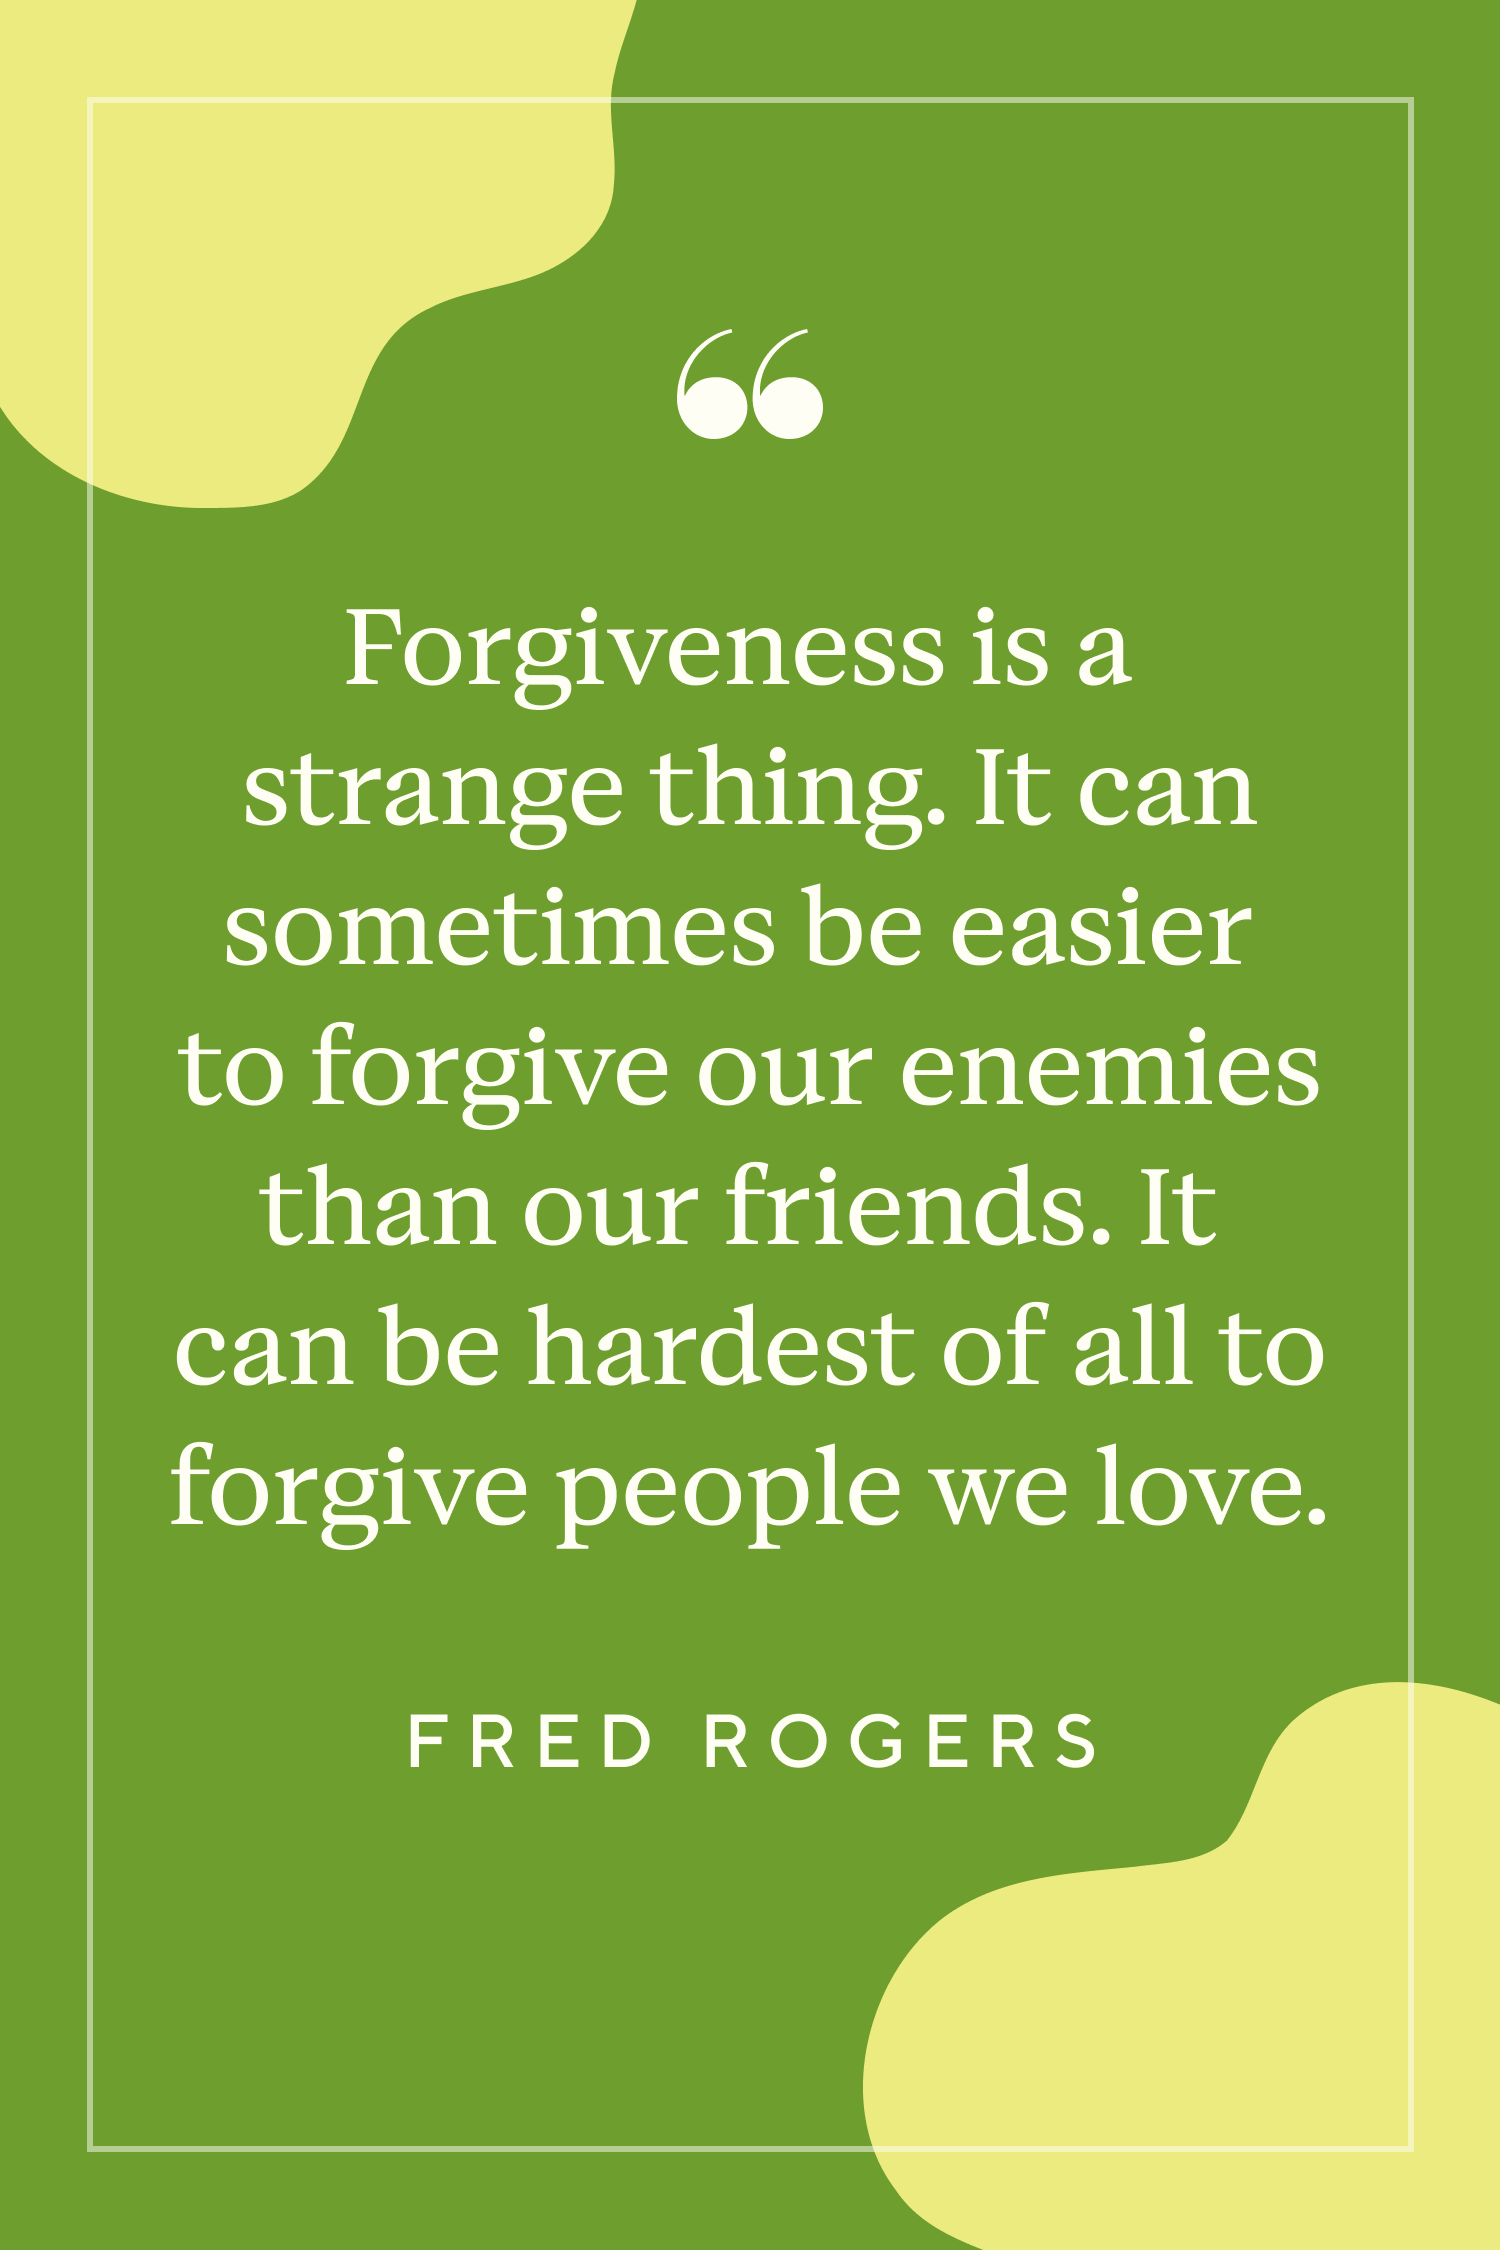 30 Forgiveness Quotes That'll Help You Move On